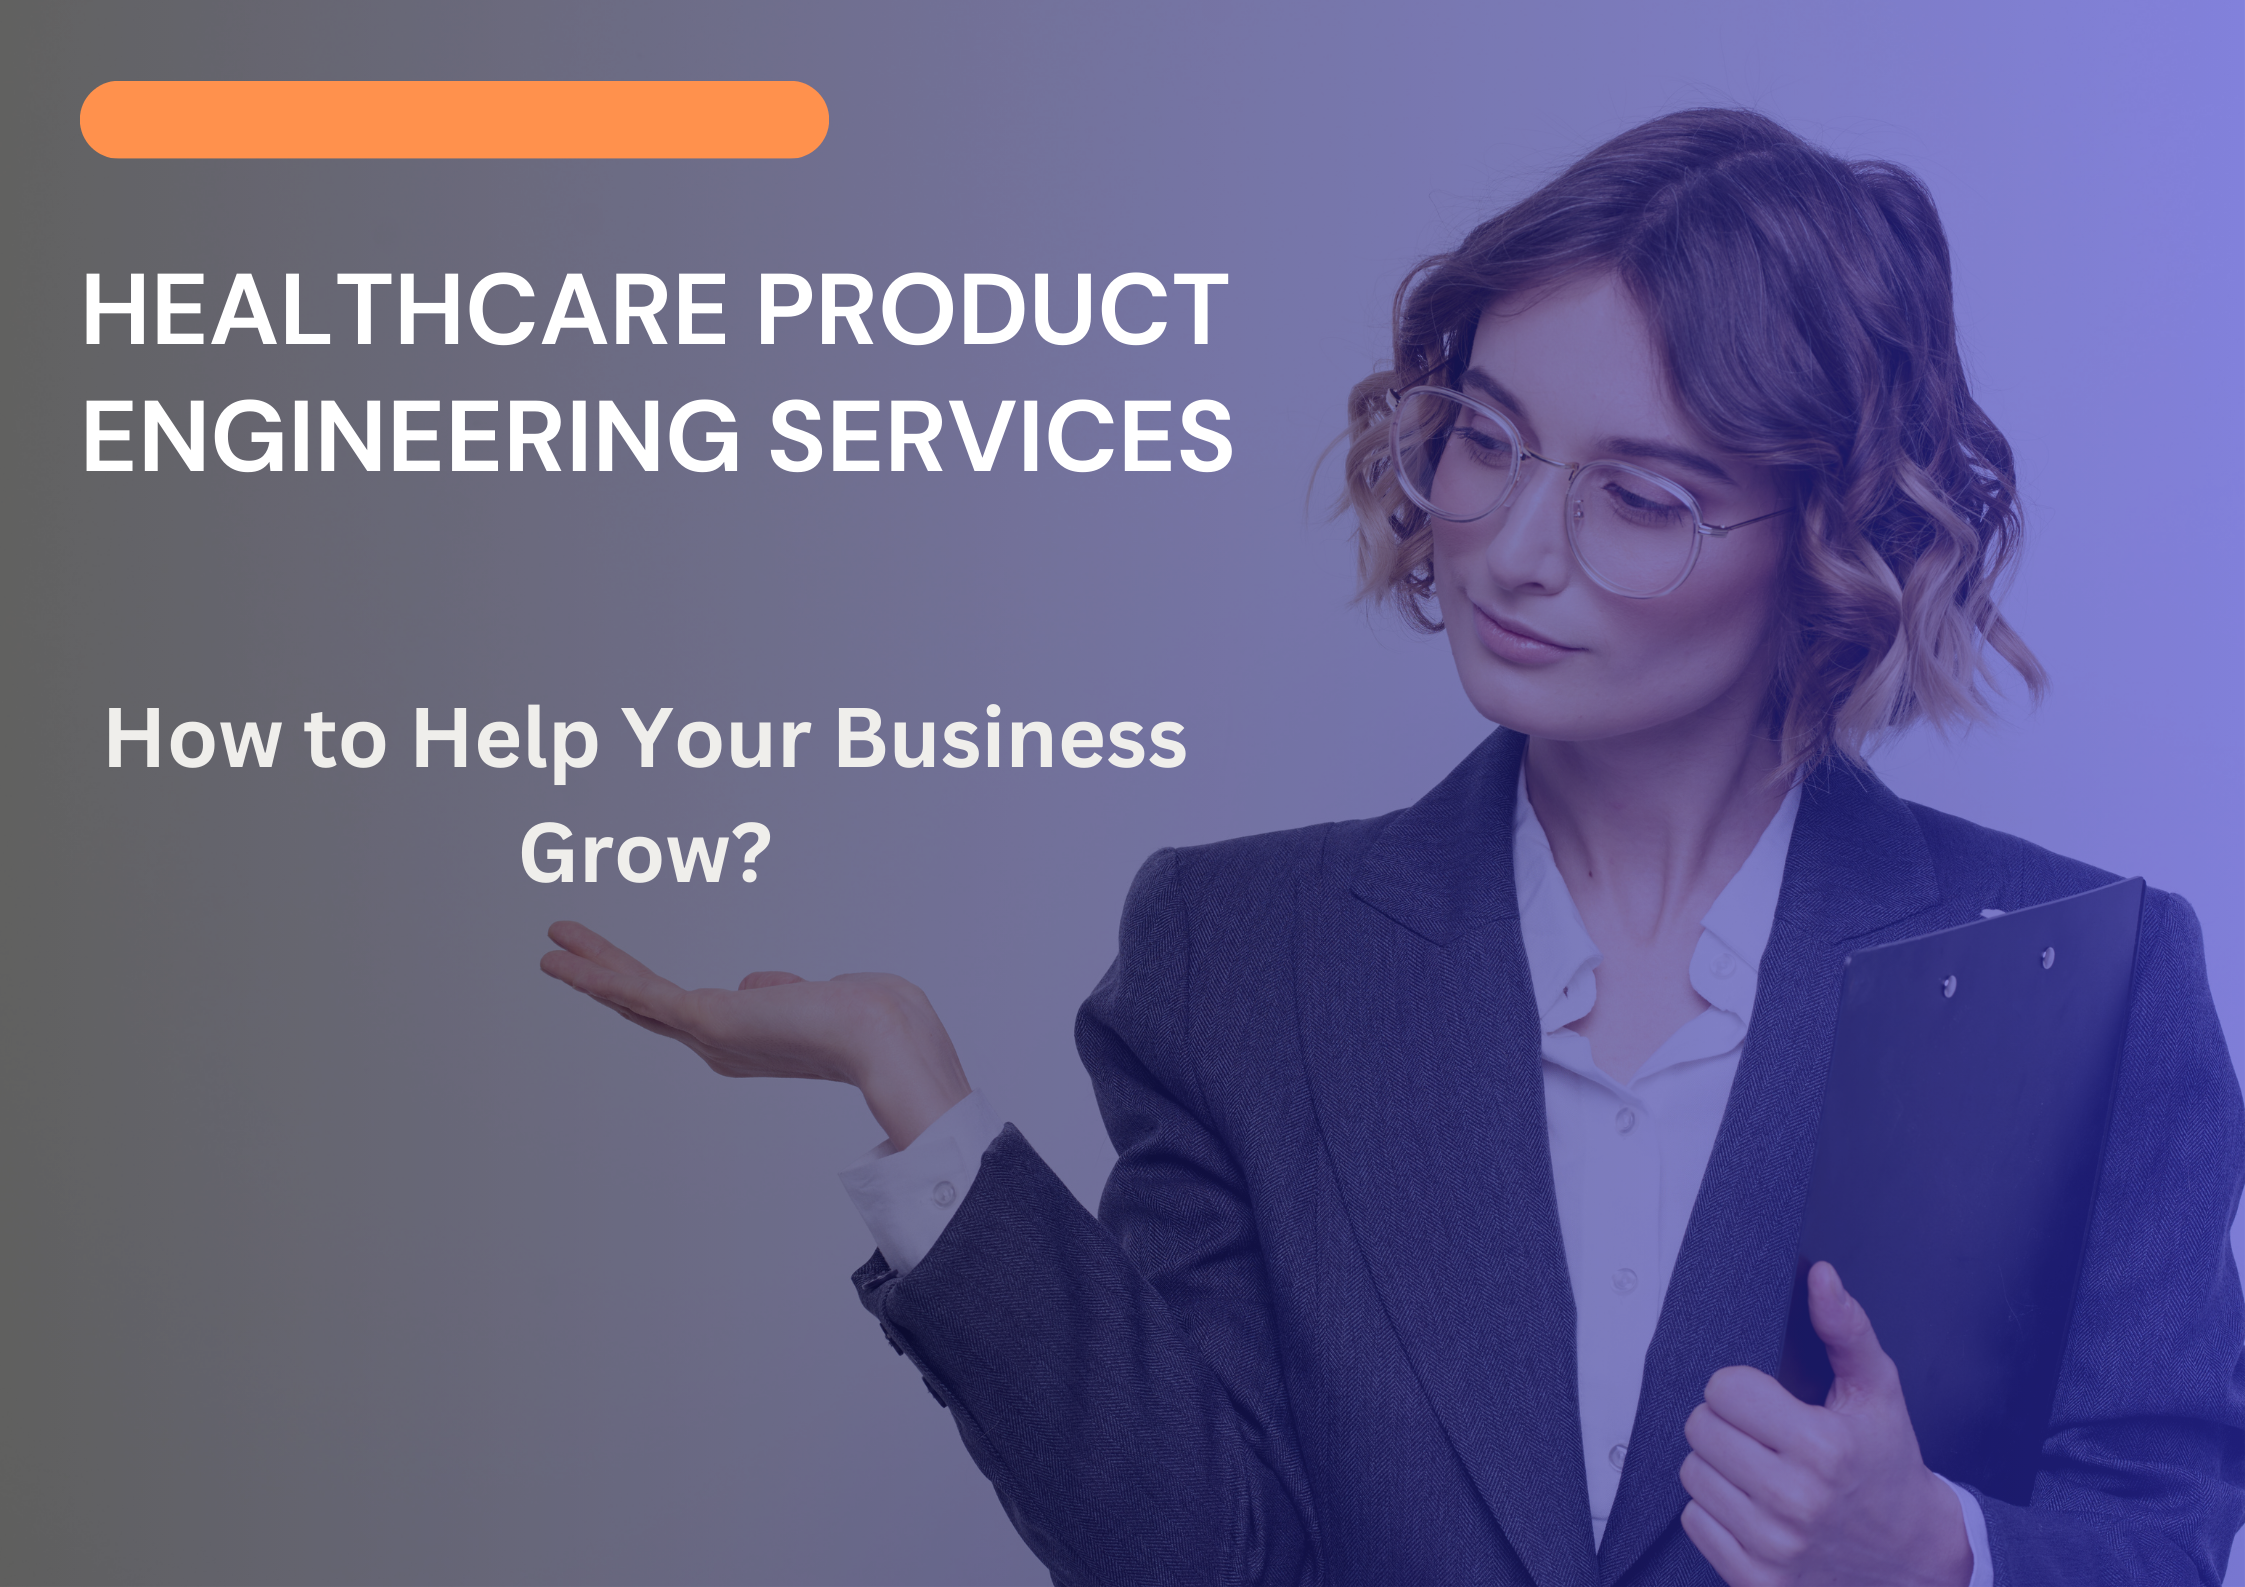 Healthcare Product Engineering Services: How to Help Your Business Grow? 